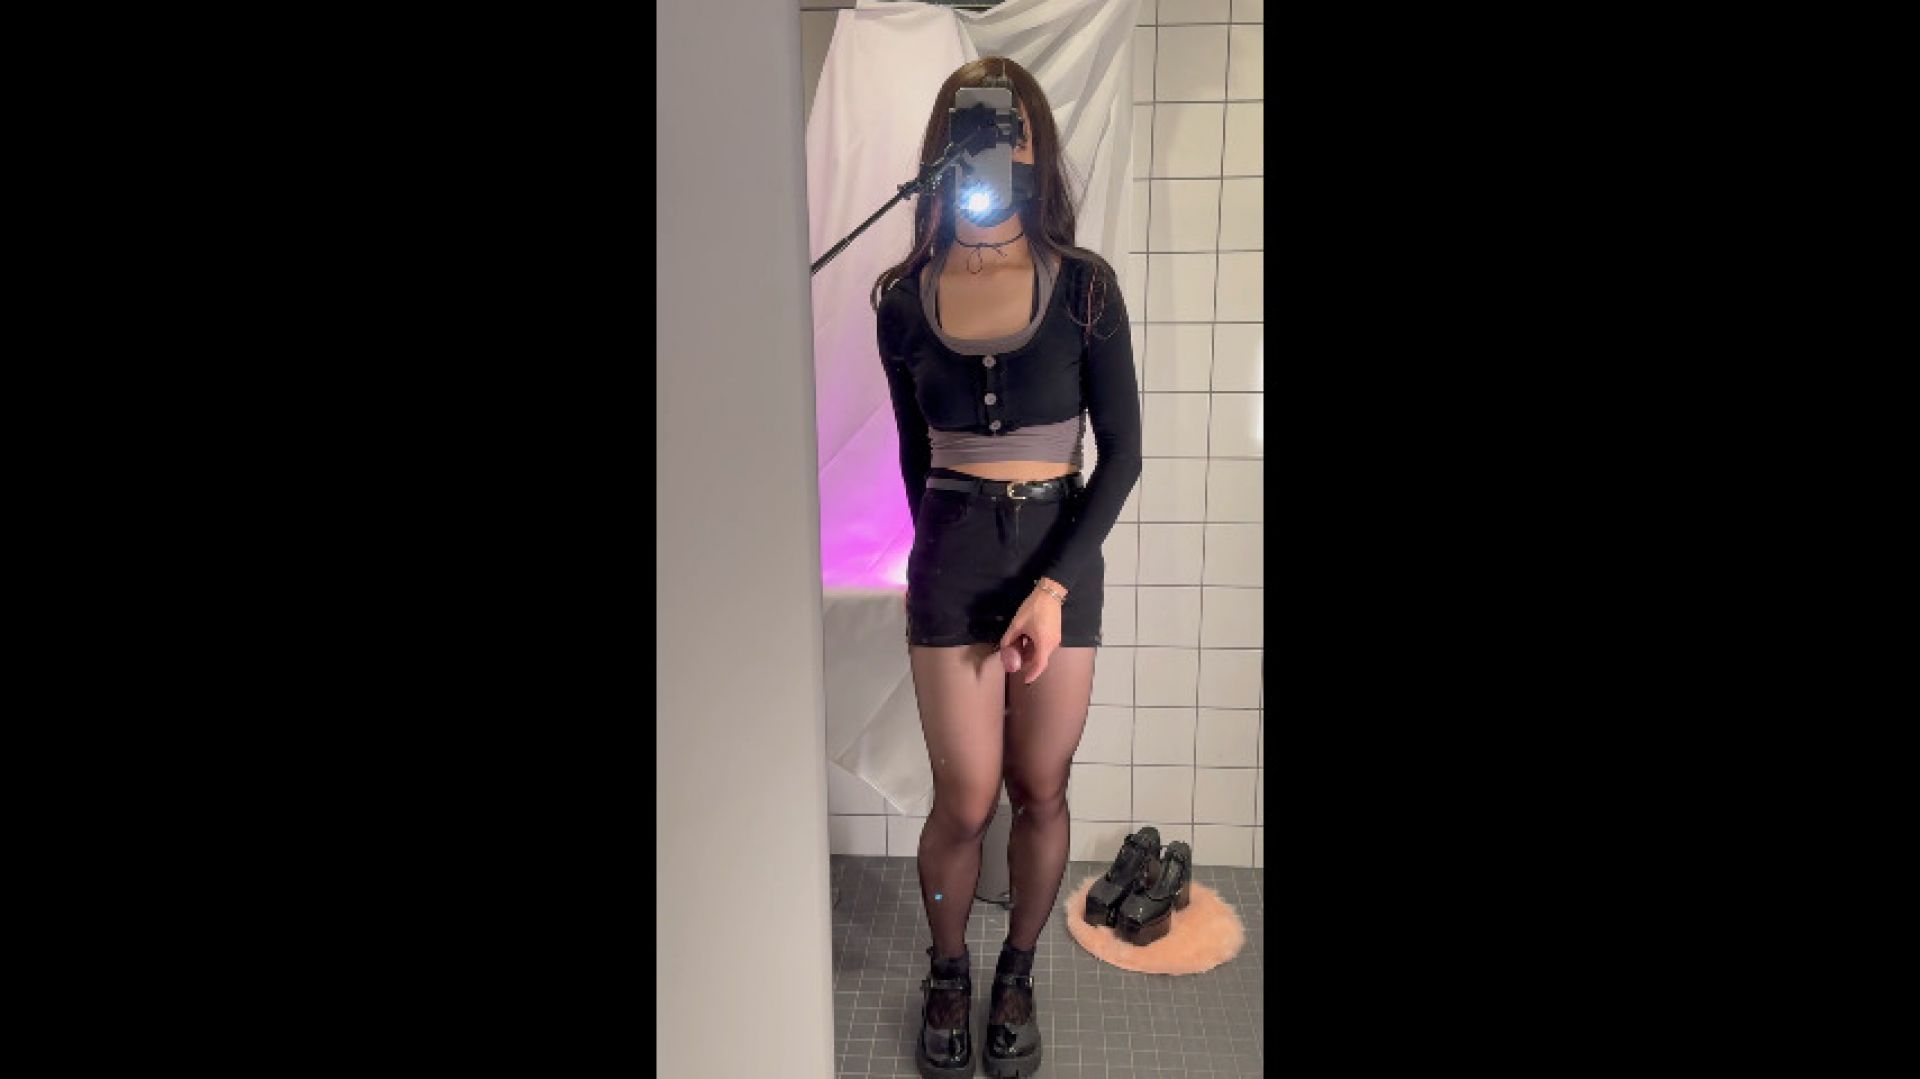 trying my new outfit cum in front of mirror